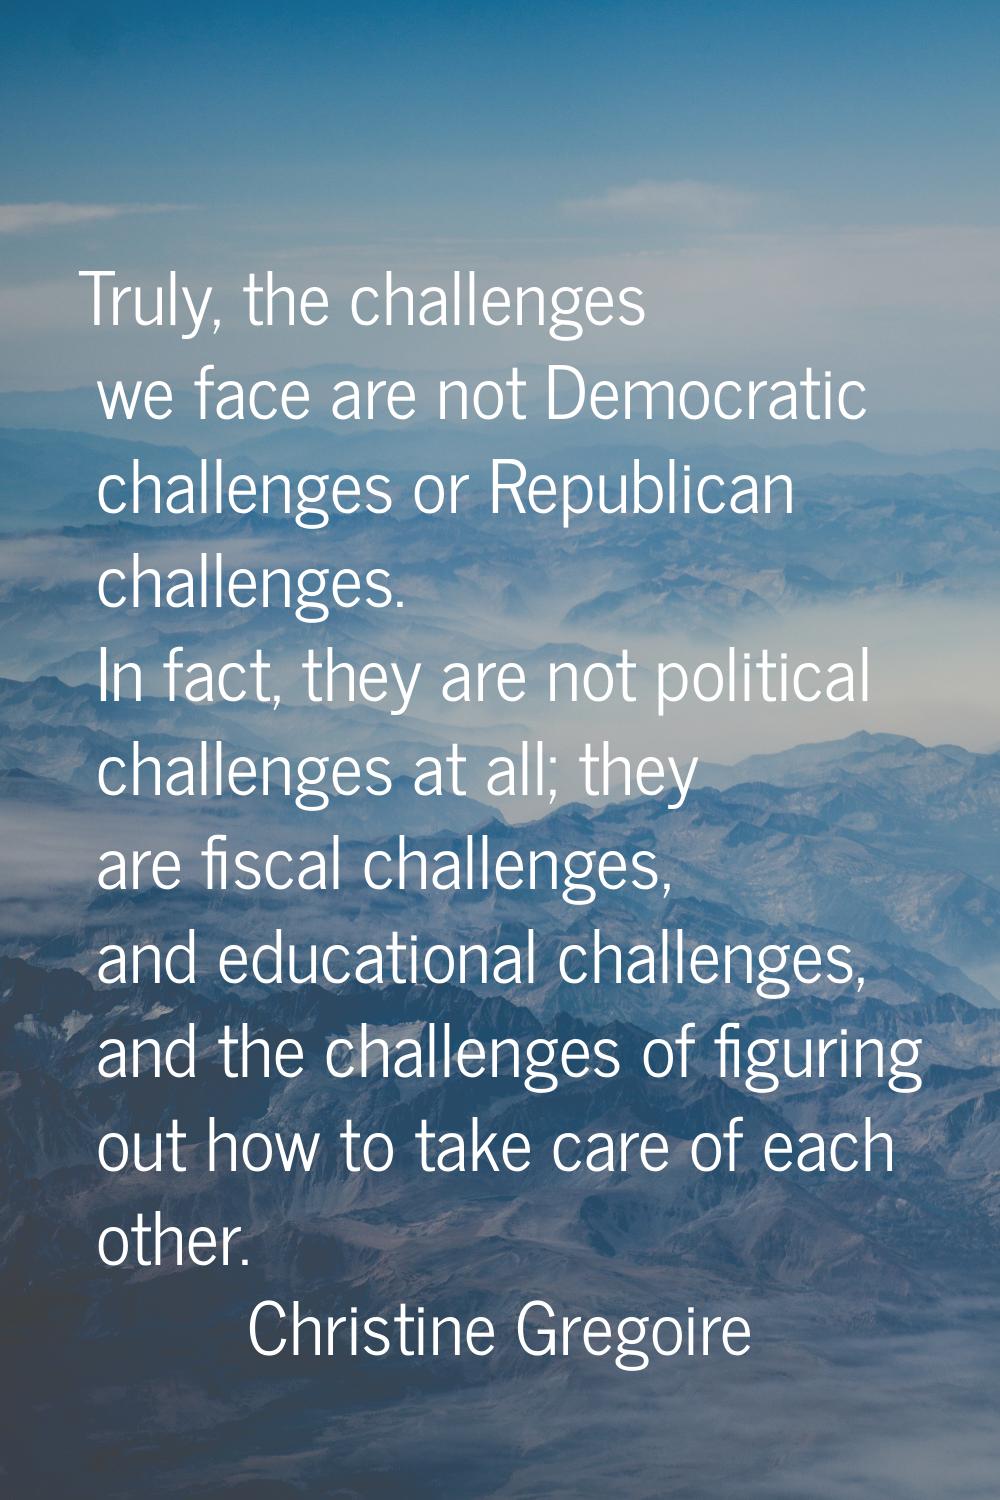 Truly, the challenges we face are not Democratic challenges or Republican challenges. In fact, they